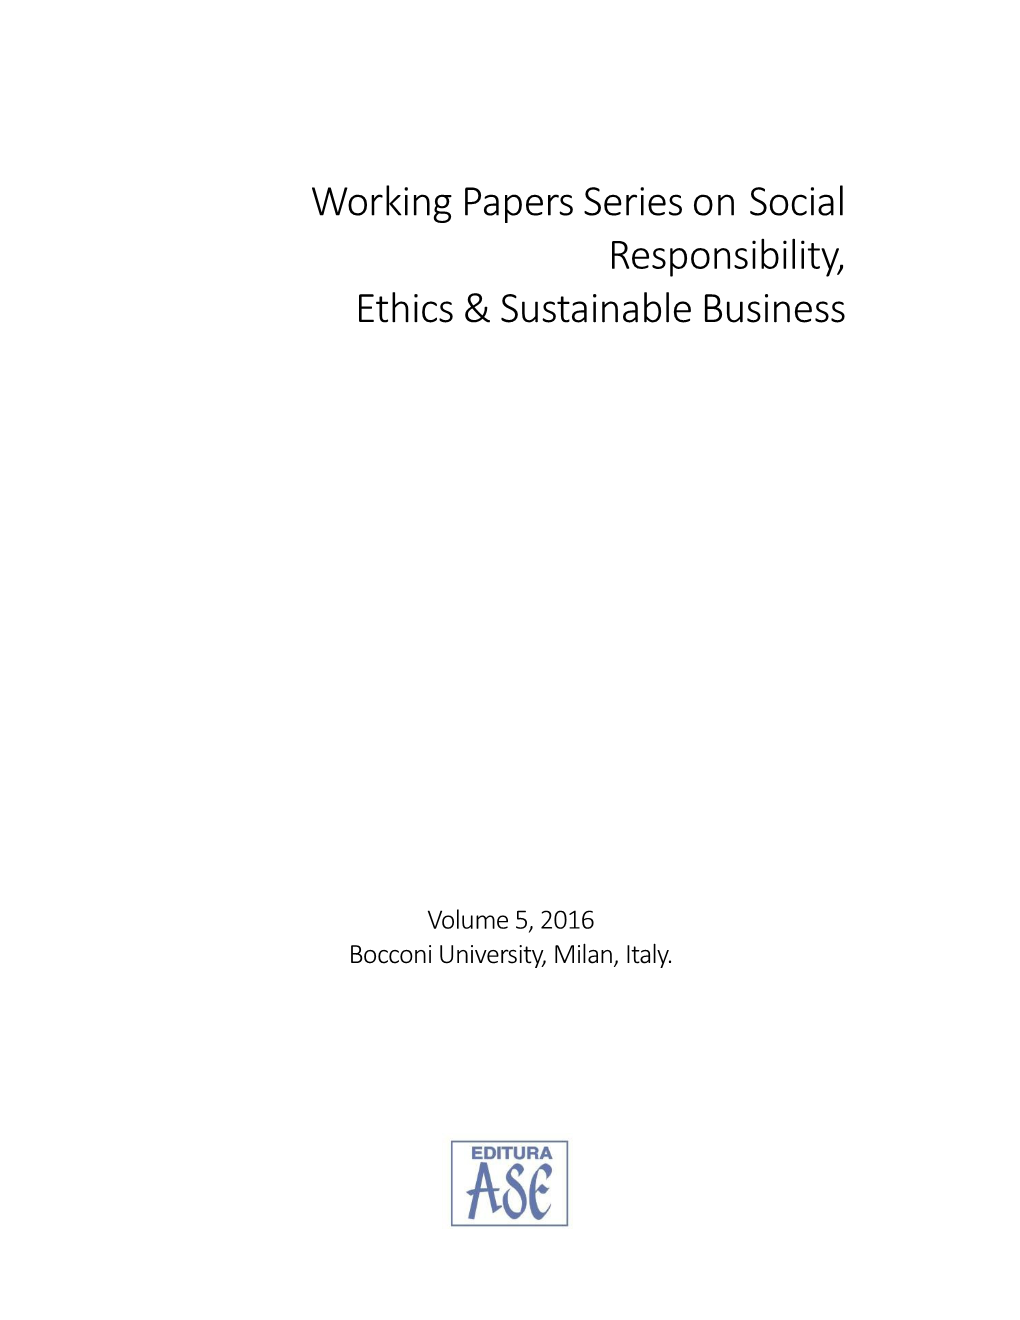 Working Papers Series on Social Responsibility, Ethics & Sustainable